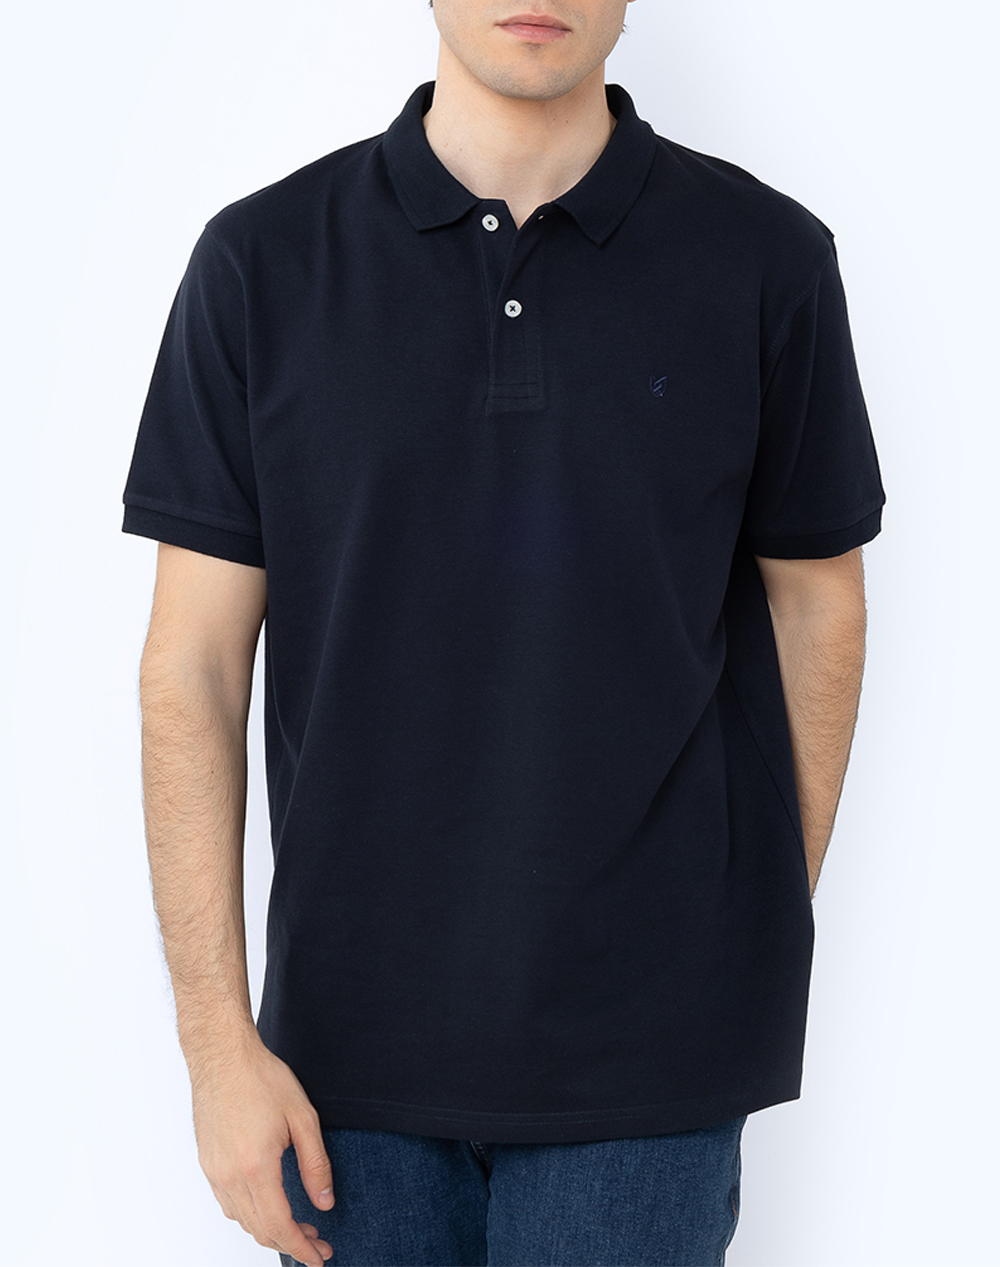 THE BOSTONIANS ΜΠΛΟΥΖΑ POLO PIQUE REGULAR FIT 3PS0001-NAVY NavyBlue 3820ABOST3410092_6131